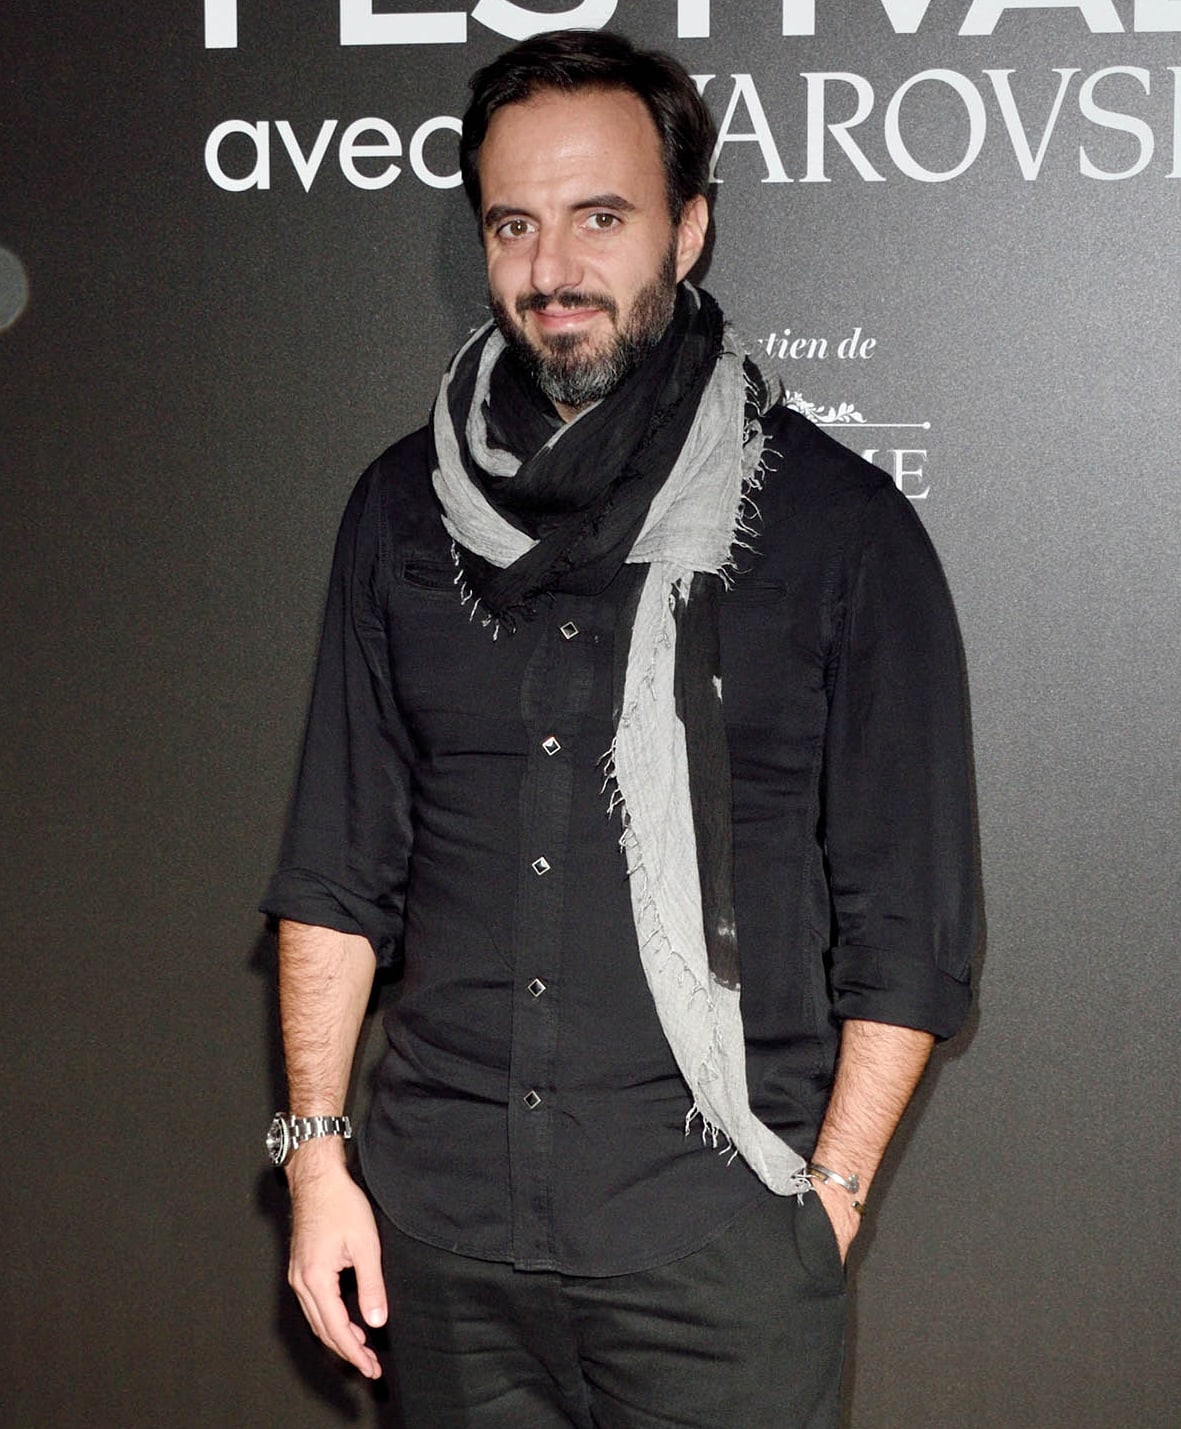 José Manuel Ferreira Neves is a Portuguese entrepreneur and the founder of Farfetch, a global luxury fashion online platform